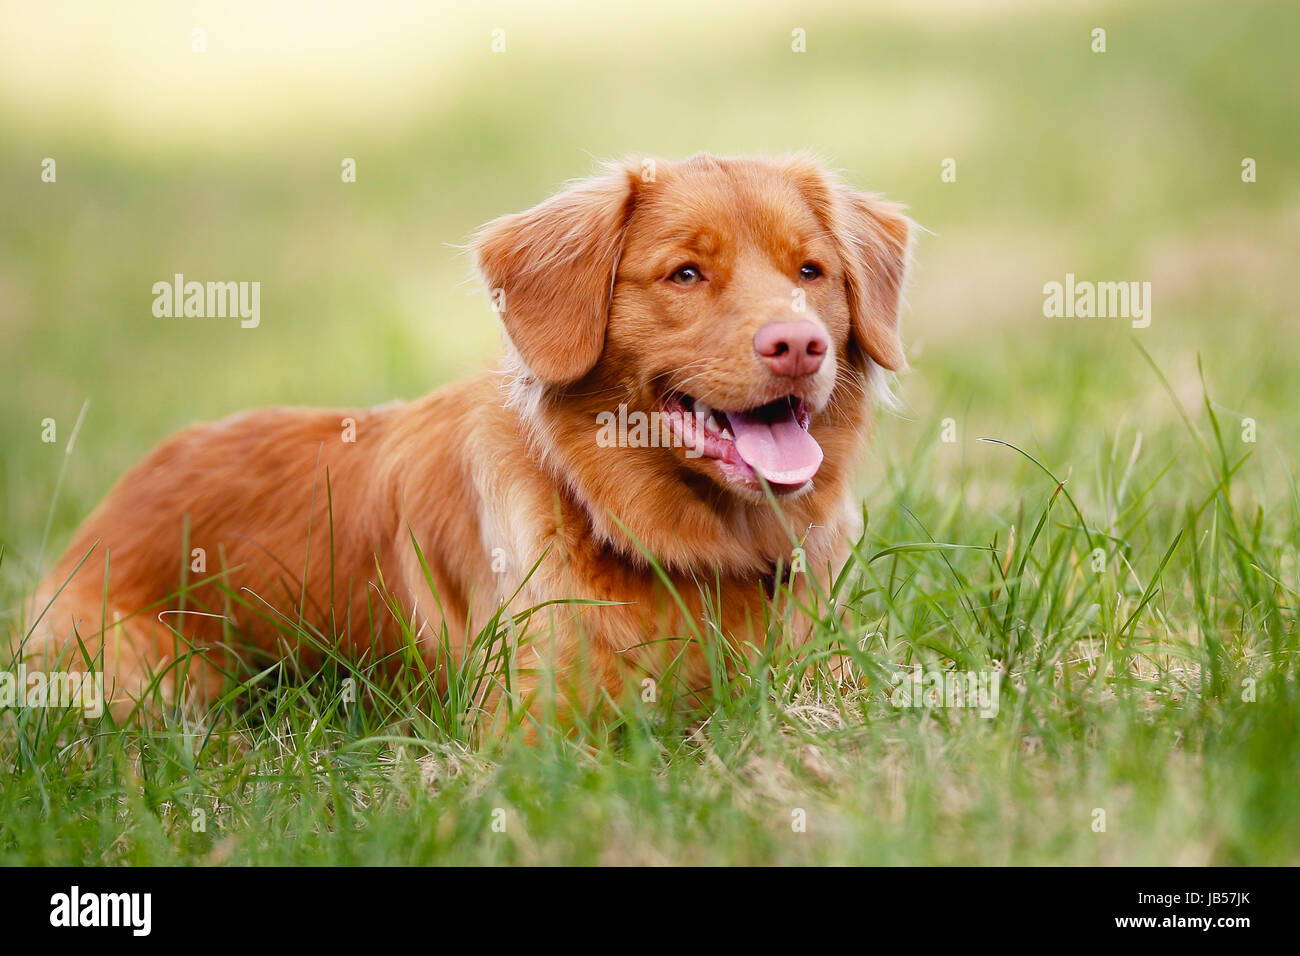 Portrait of brown toller dog looking to the side. Stock Photo